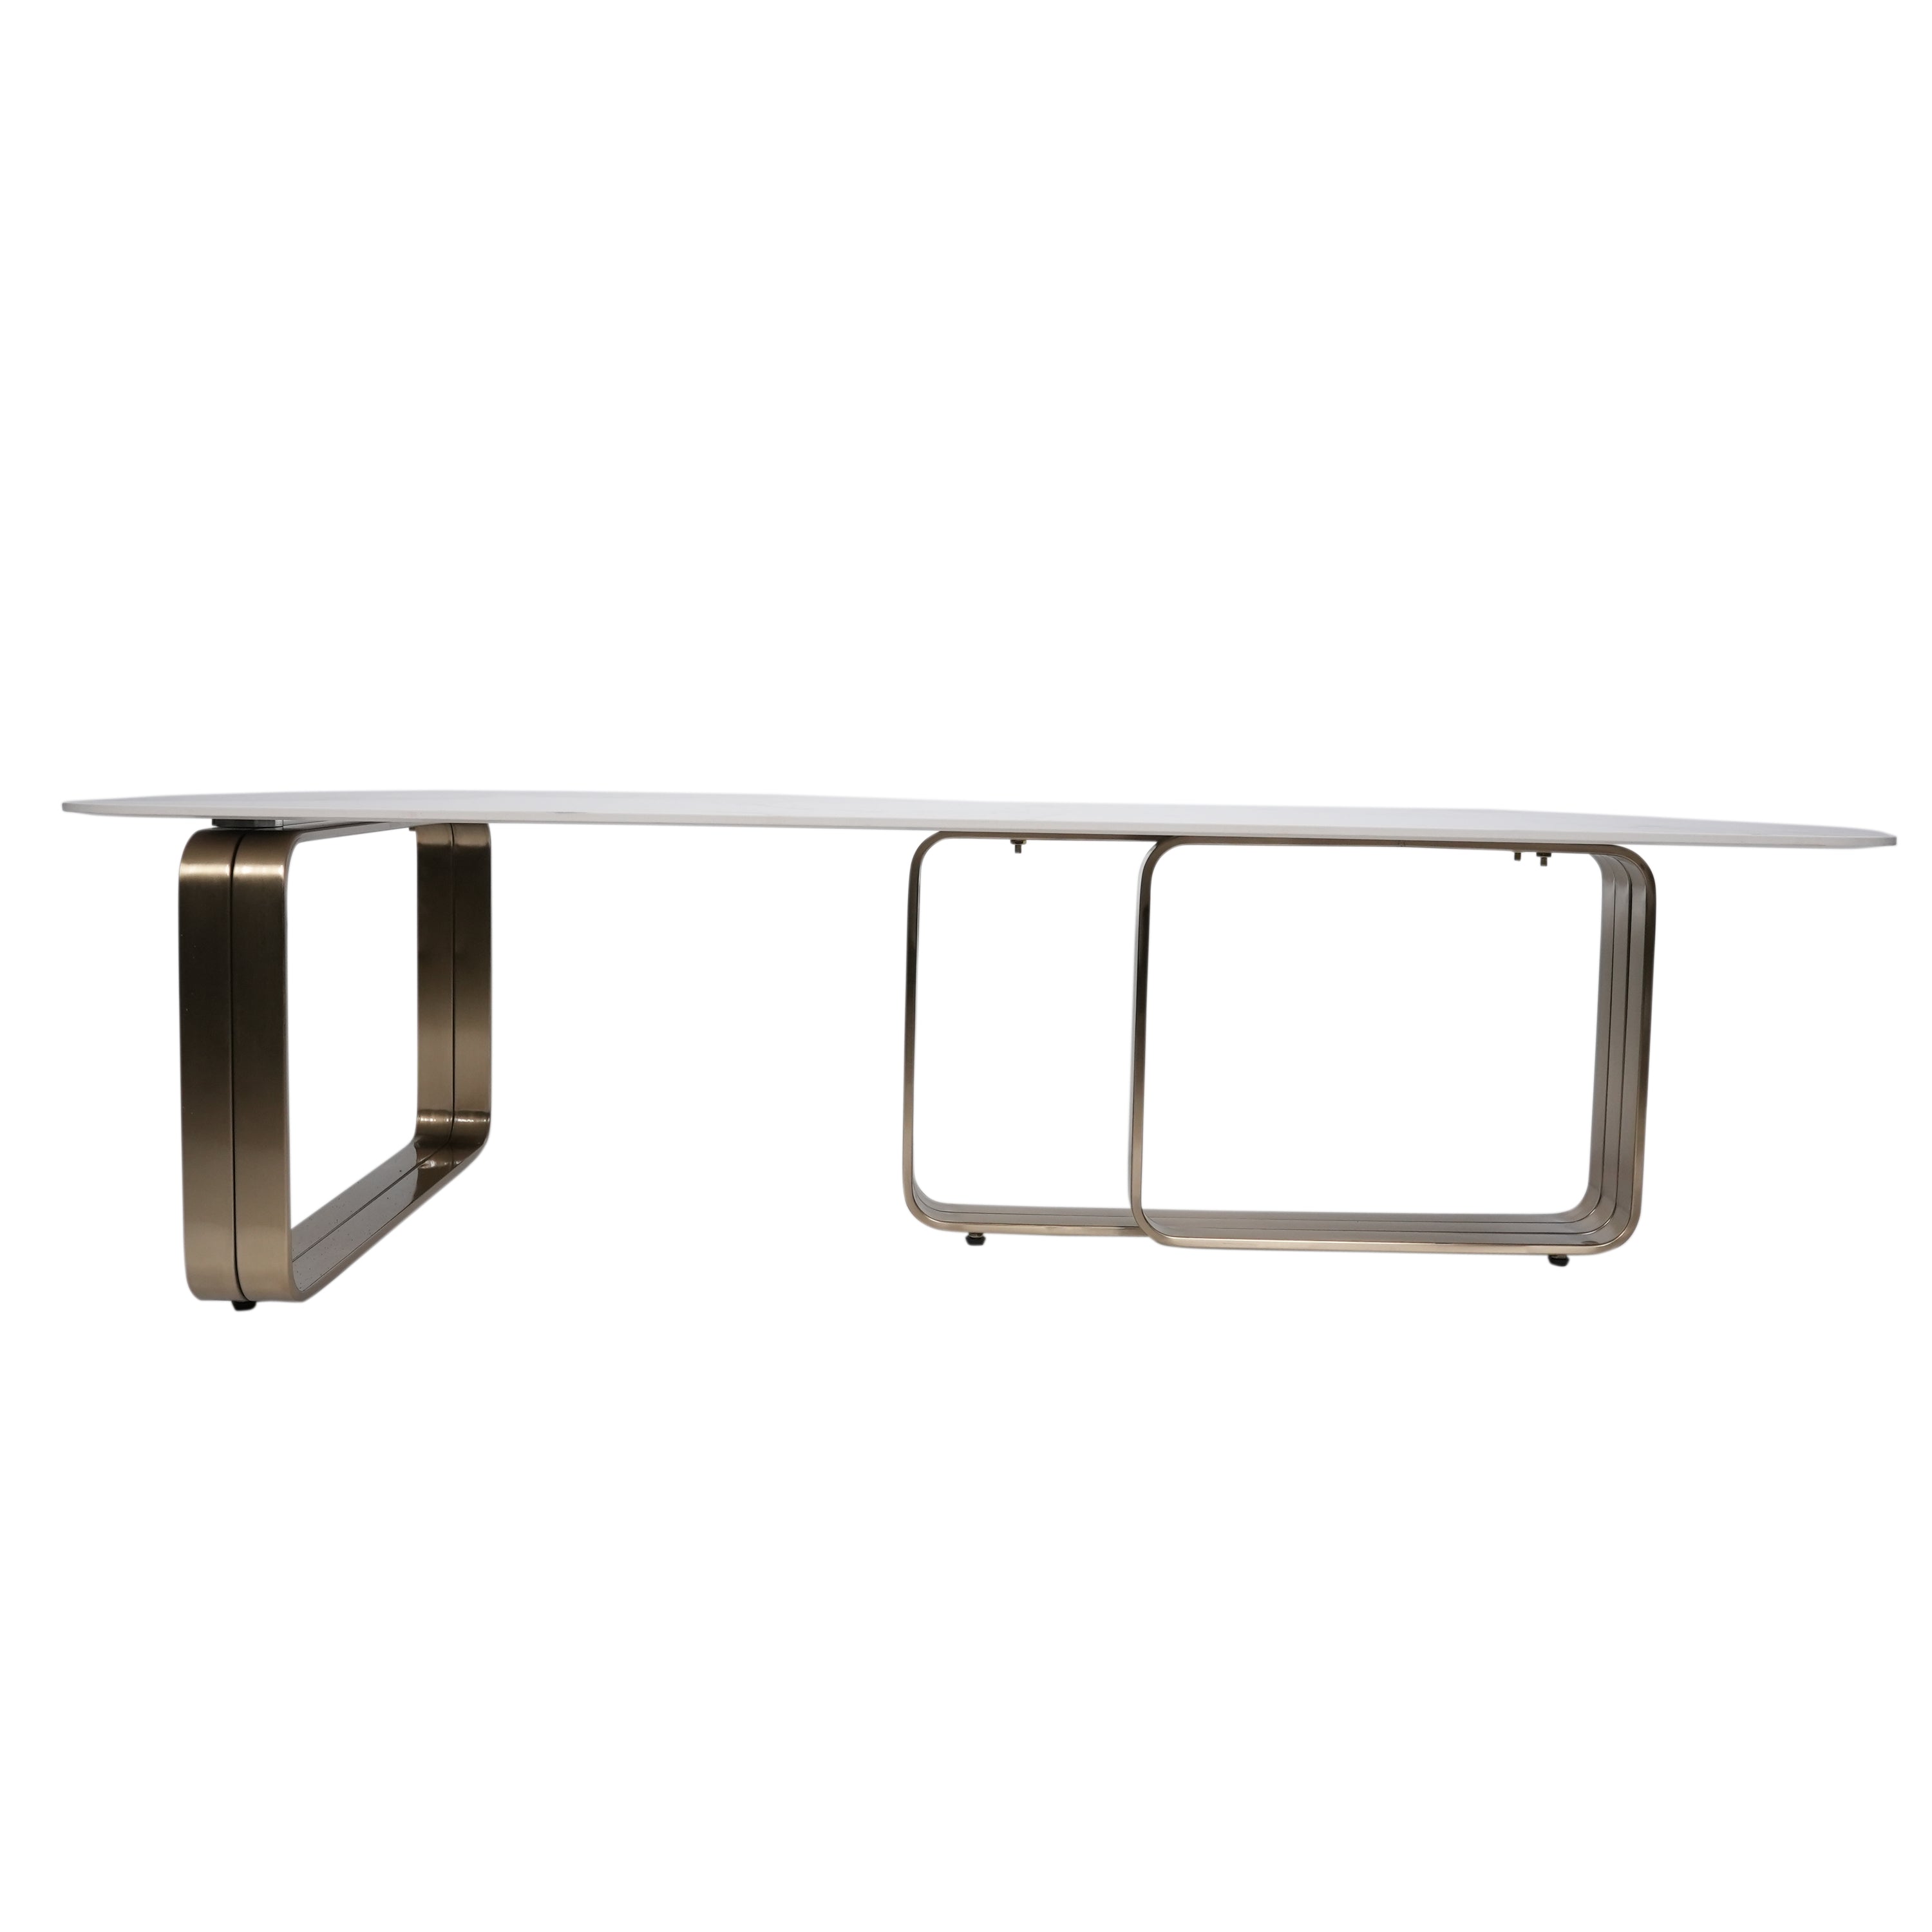 Norton Center Table With Marble Top And Stainless Steel Base